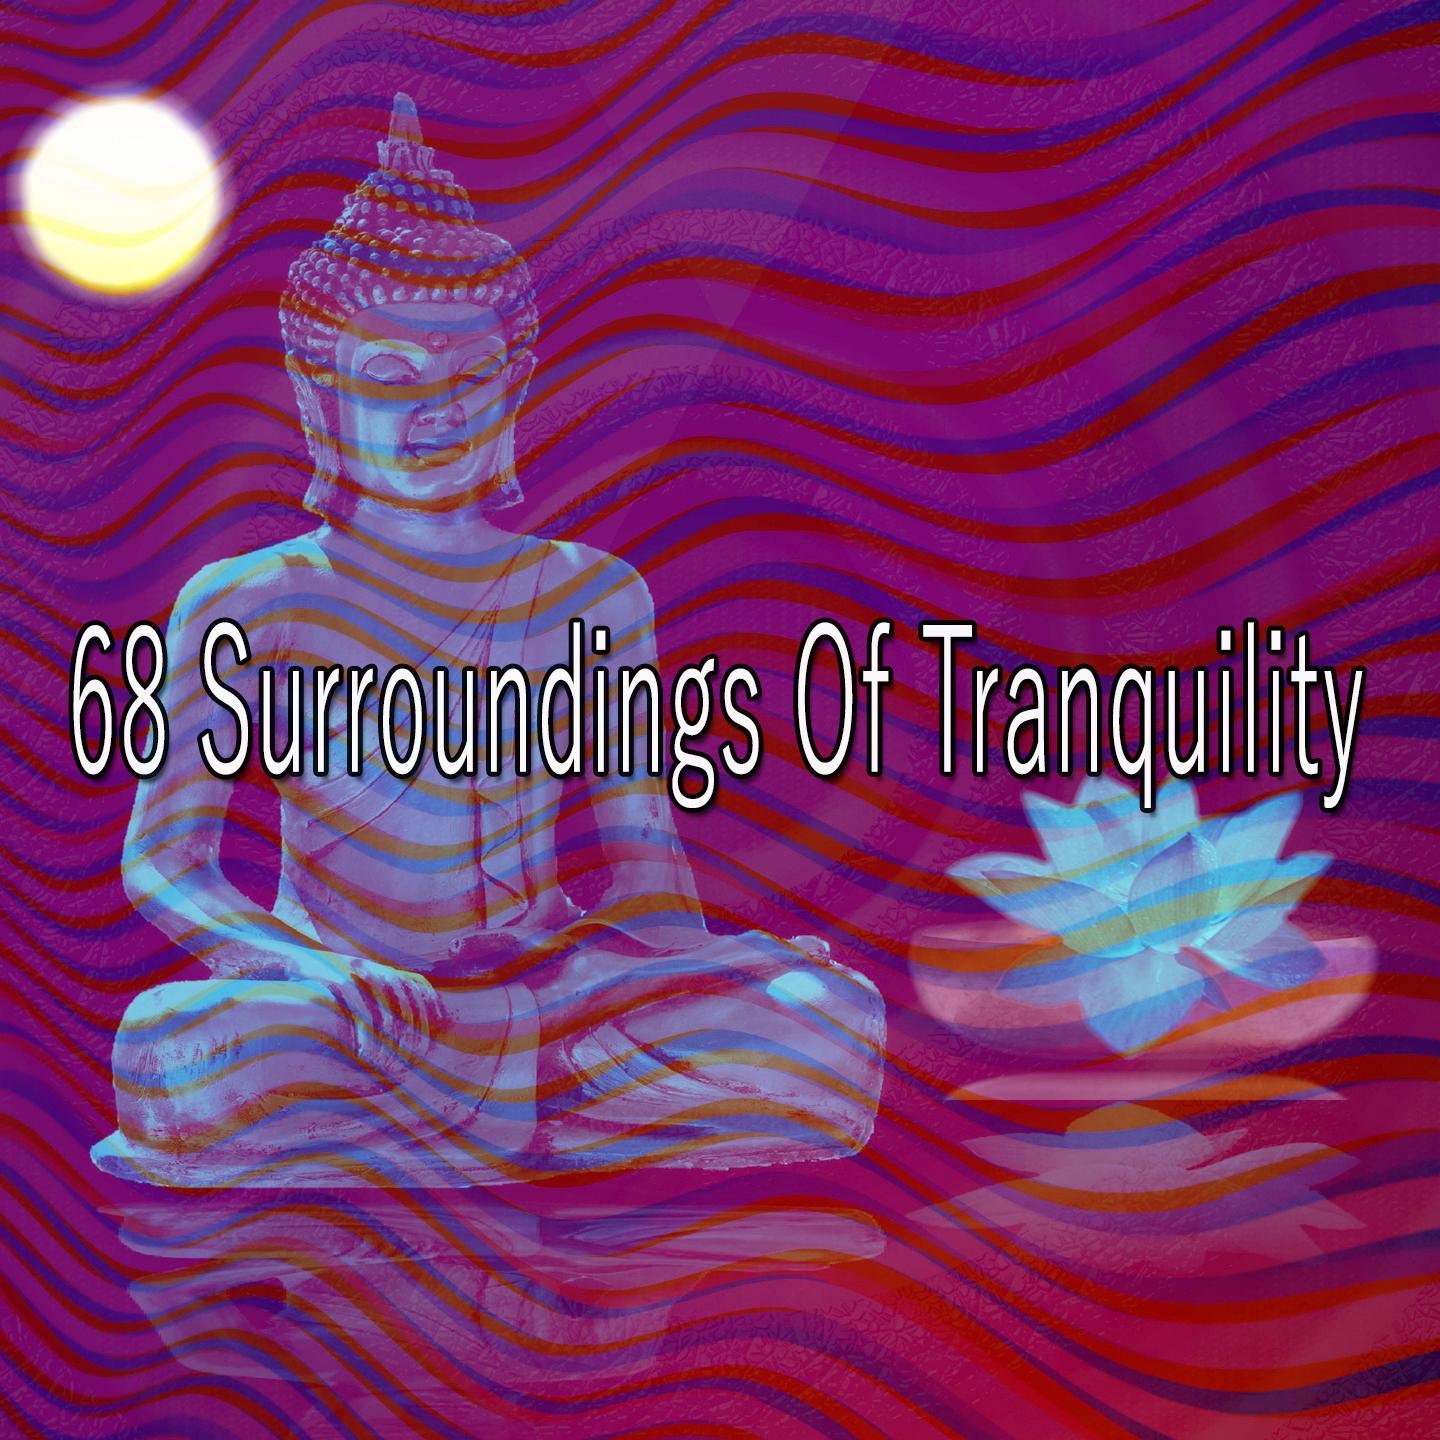 68 Surroundings of Tranquility